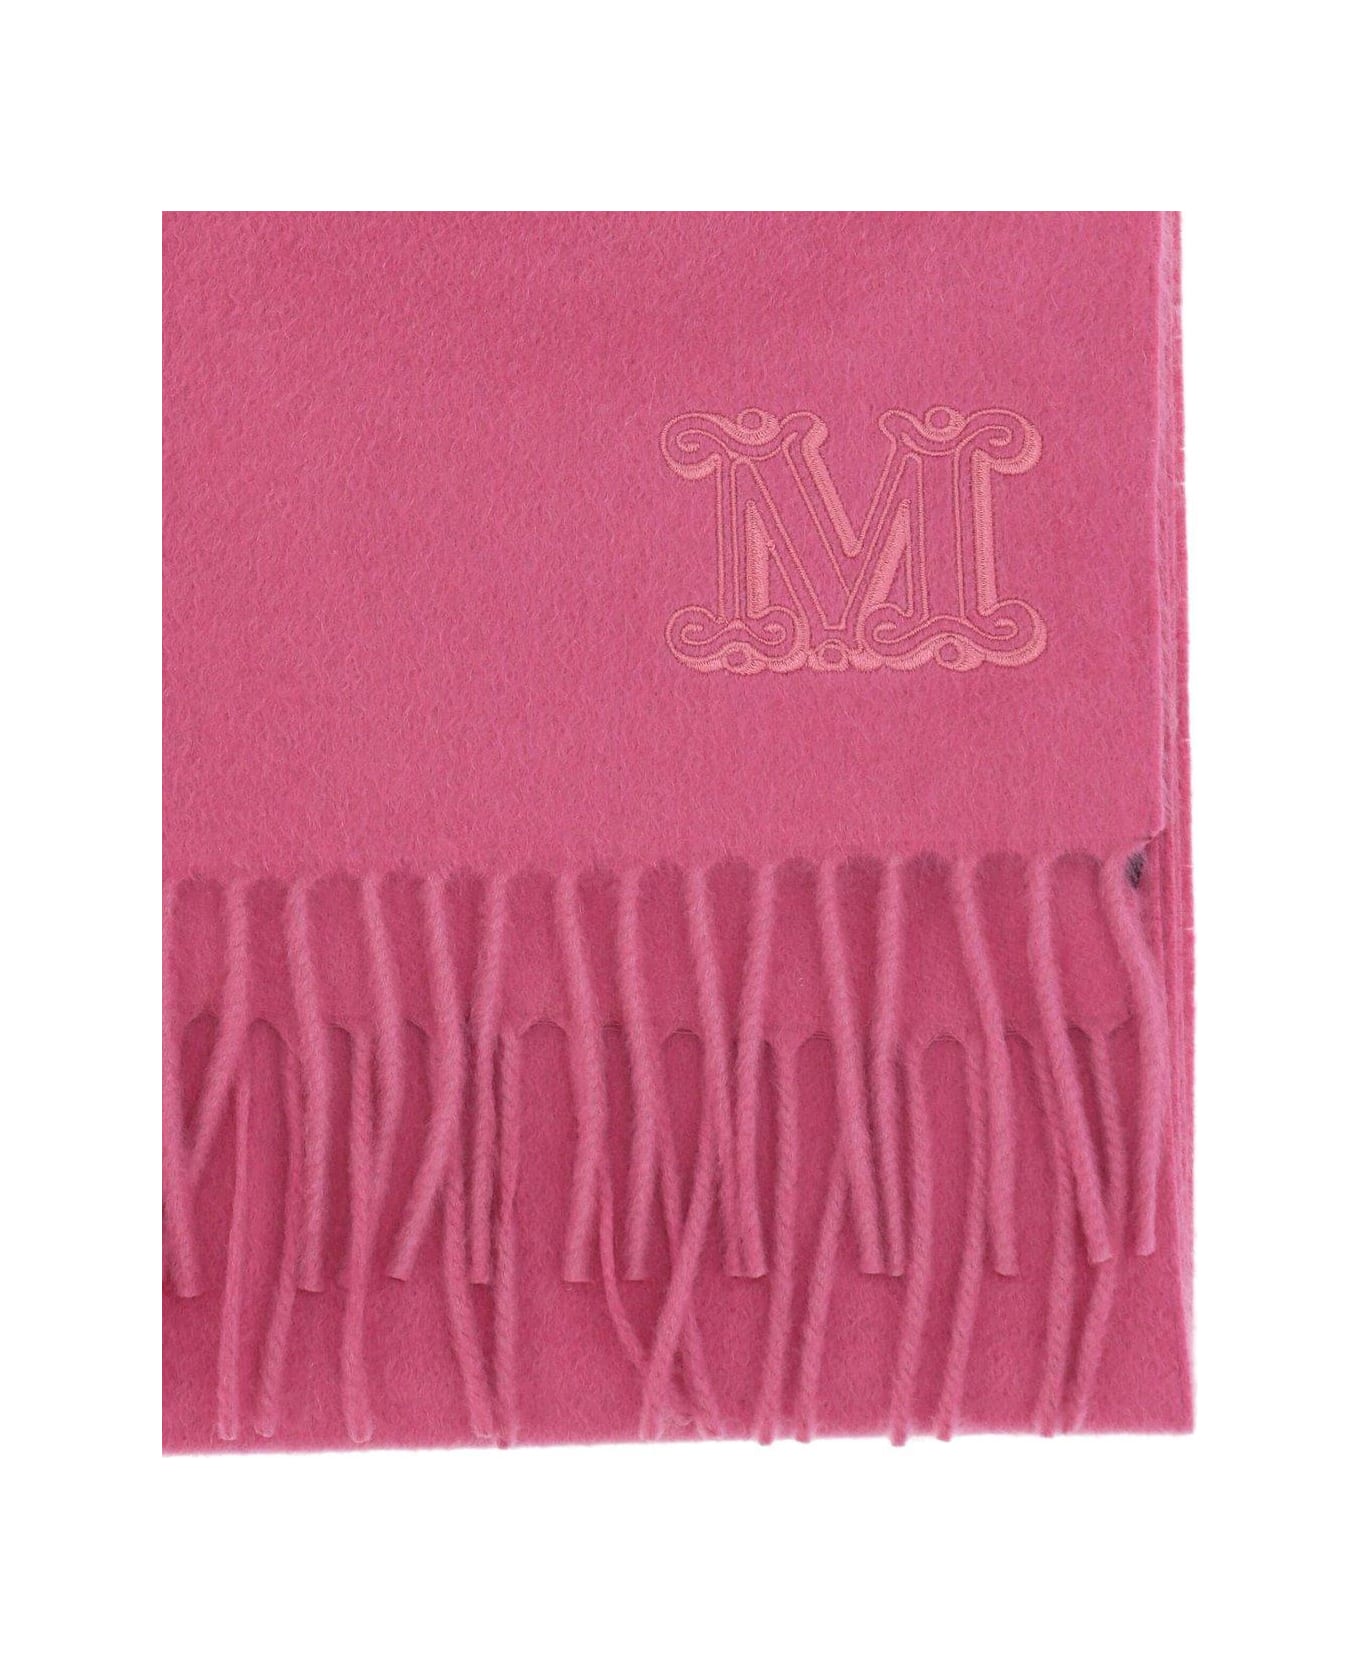 Max Mara Logo Embroidered Fringed Knitted Scarf - Antique Rose スカーフ＆ストール